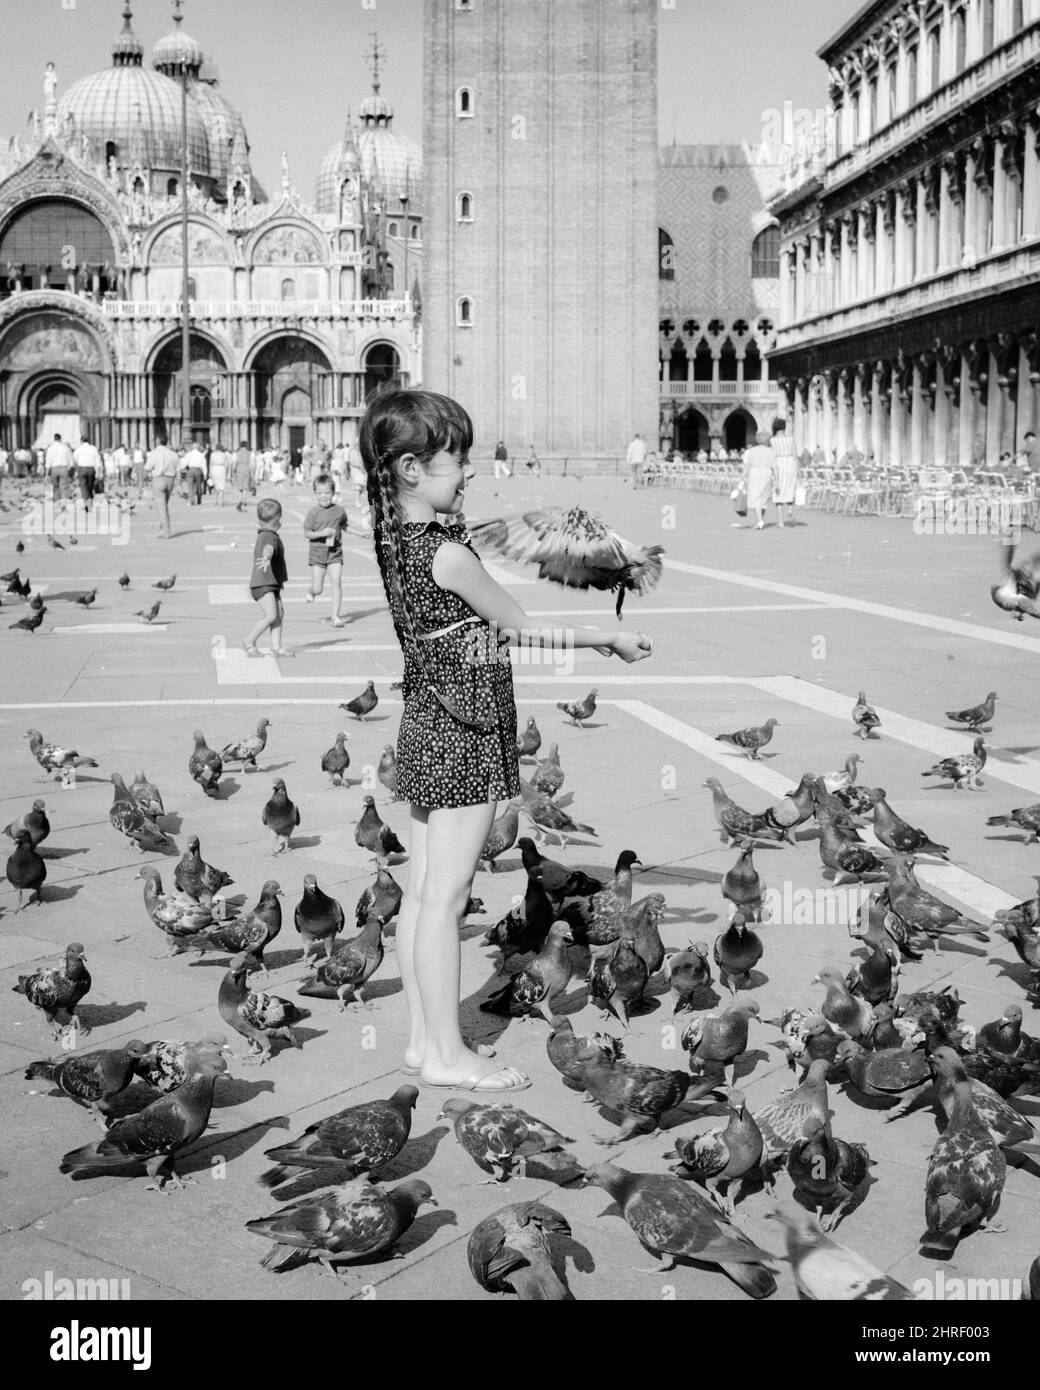 1970s LITTLE BRUNETTE GIRL FEEDING PIGEONS IN SAN MARCO SQUARE VENICE ITALY - r22926 HAR001 HARS HAPPINESS ADVENTURE DISCOVERY EUROPEAN EXCITEMENT TOURIST ITALY MOTION BLUR VERTEBRATE WARM-BLOODED FEATHERED GROWTH JUVENILES PIGEONS TOURIST ATTRACTION WINGED BIPEDAL BLACK AND WHITE CAUCASIAN ETHNICITY EGG-LAYING HAR001 MARCO OLD FASHIONED TOURISM VENEZIA Stock Photo